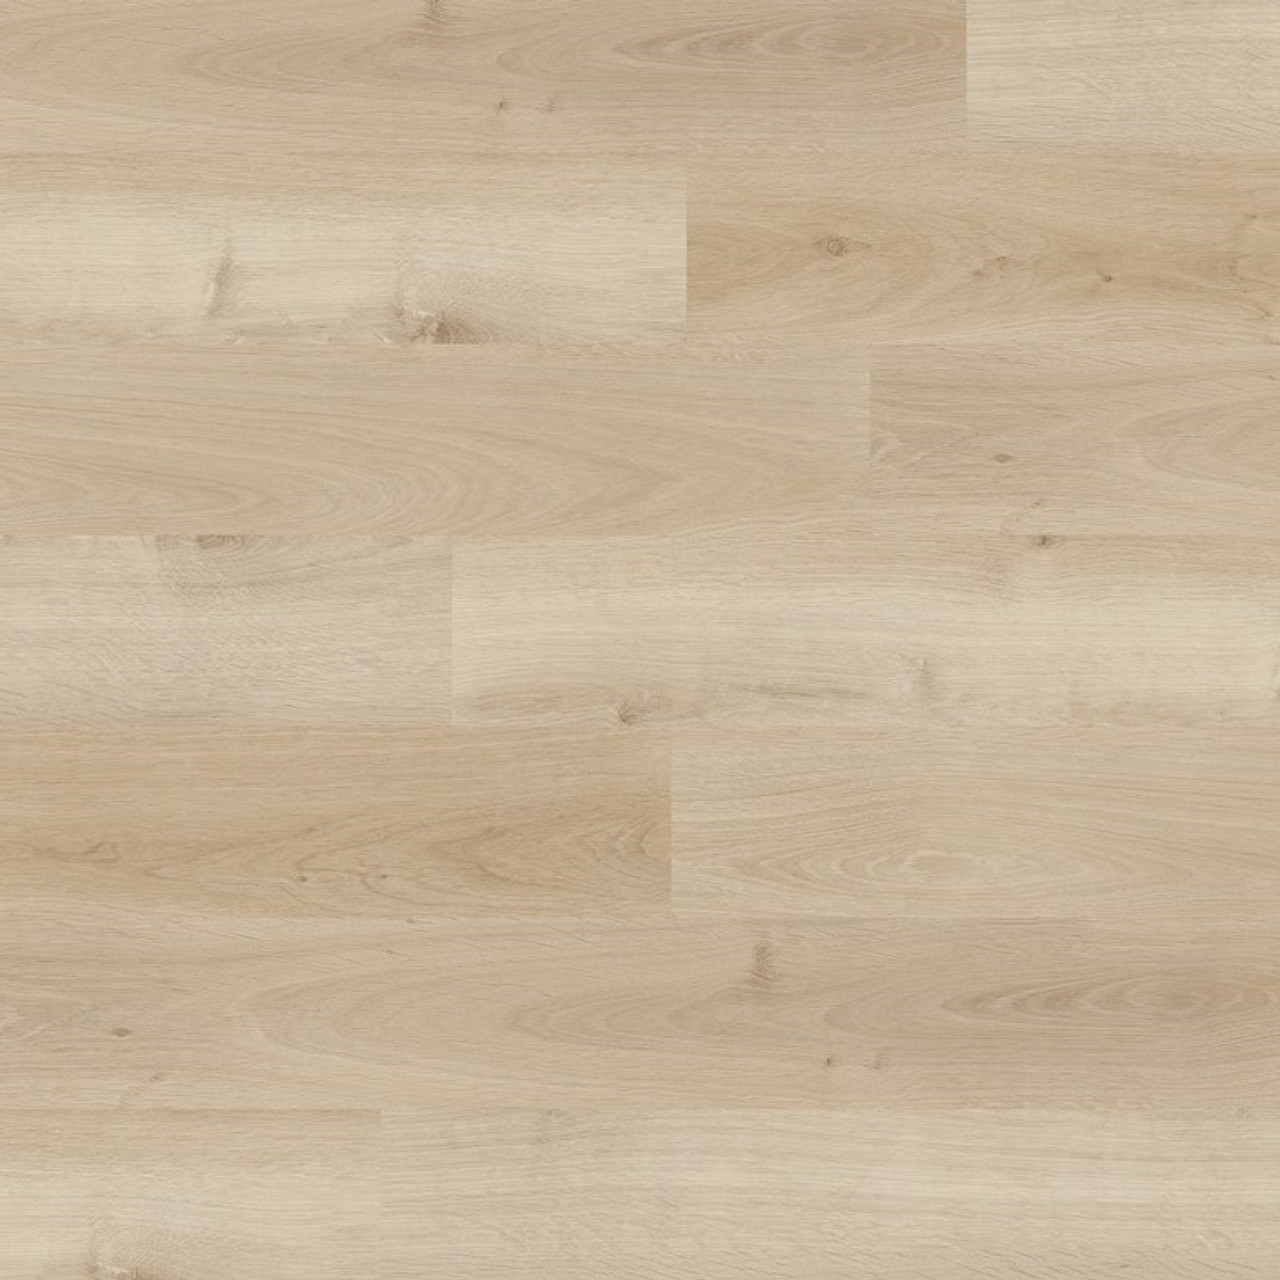 LVP floor (wood-like): why is it grouted? and how to clean? : r